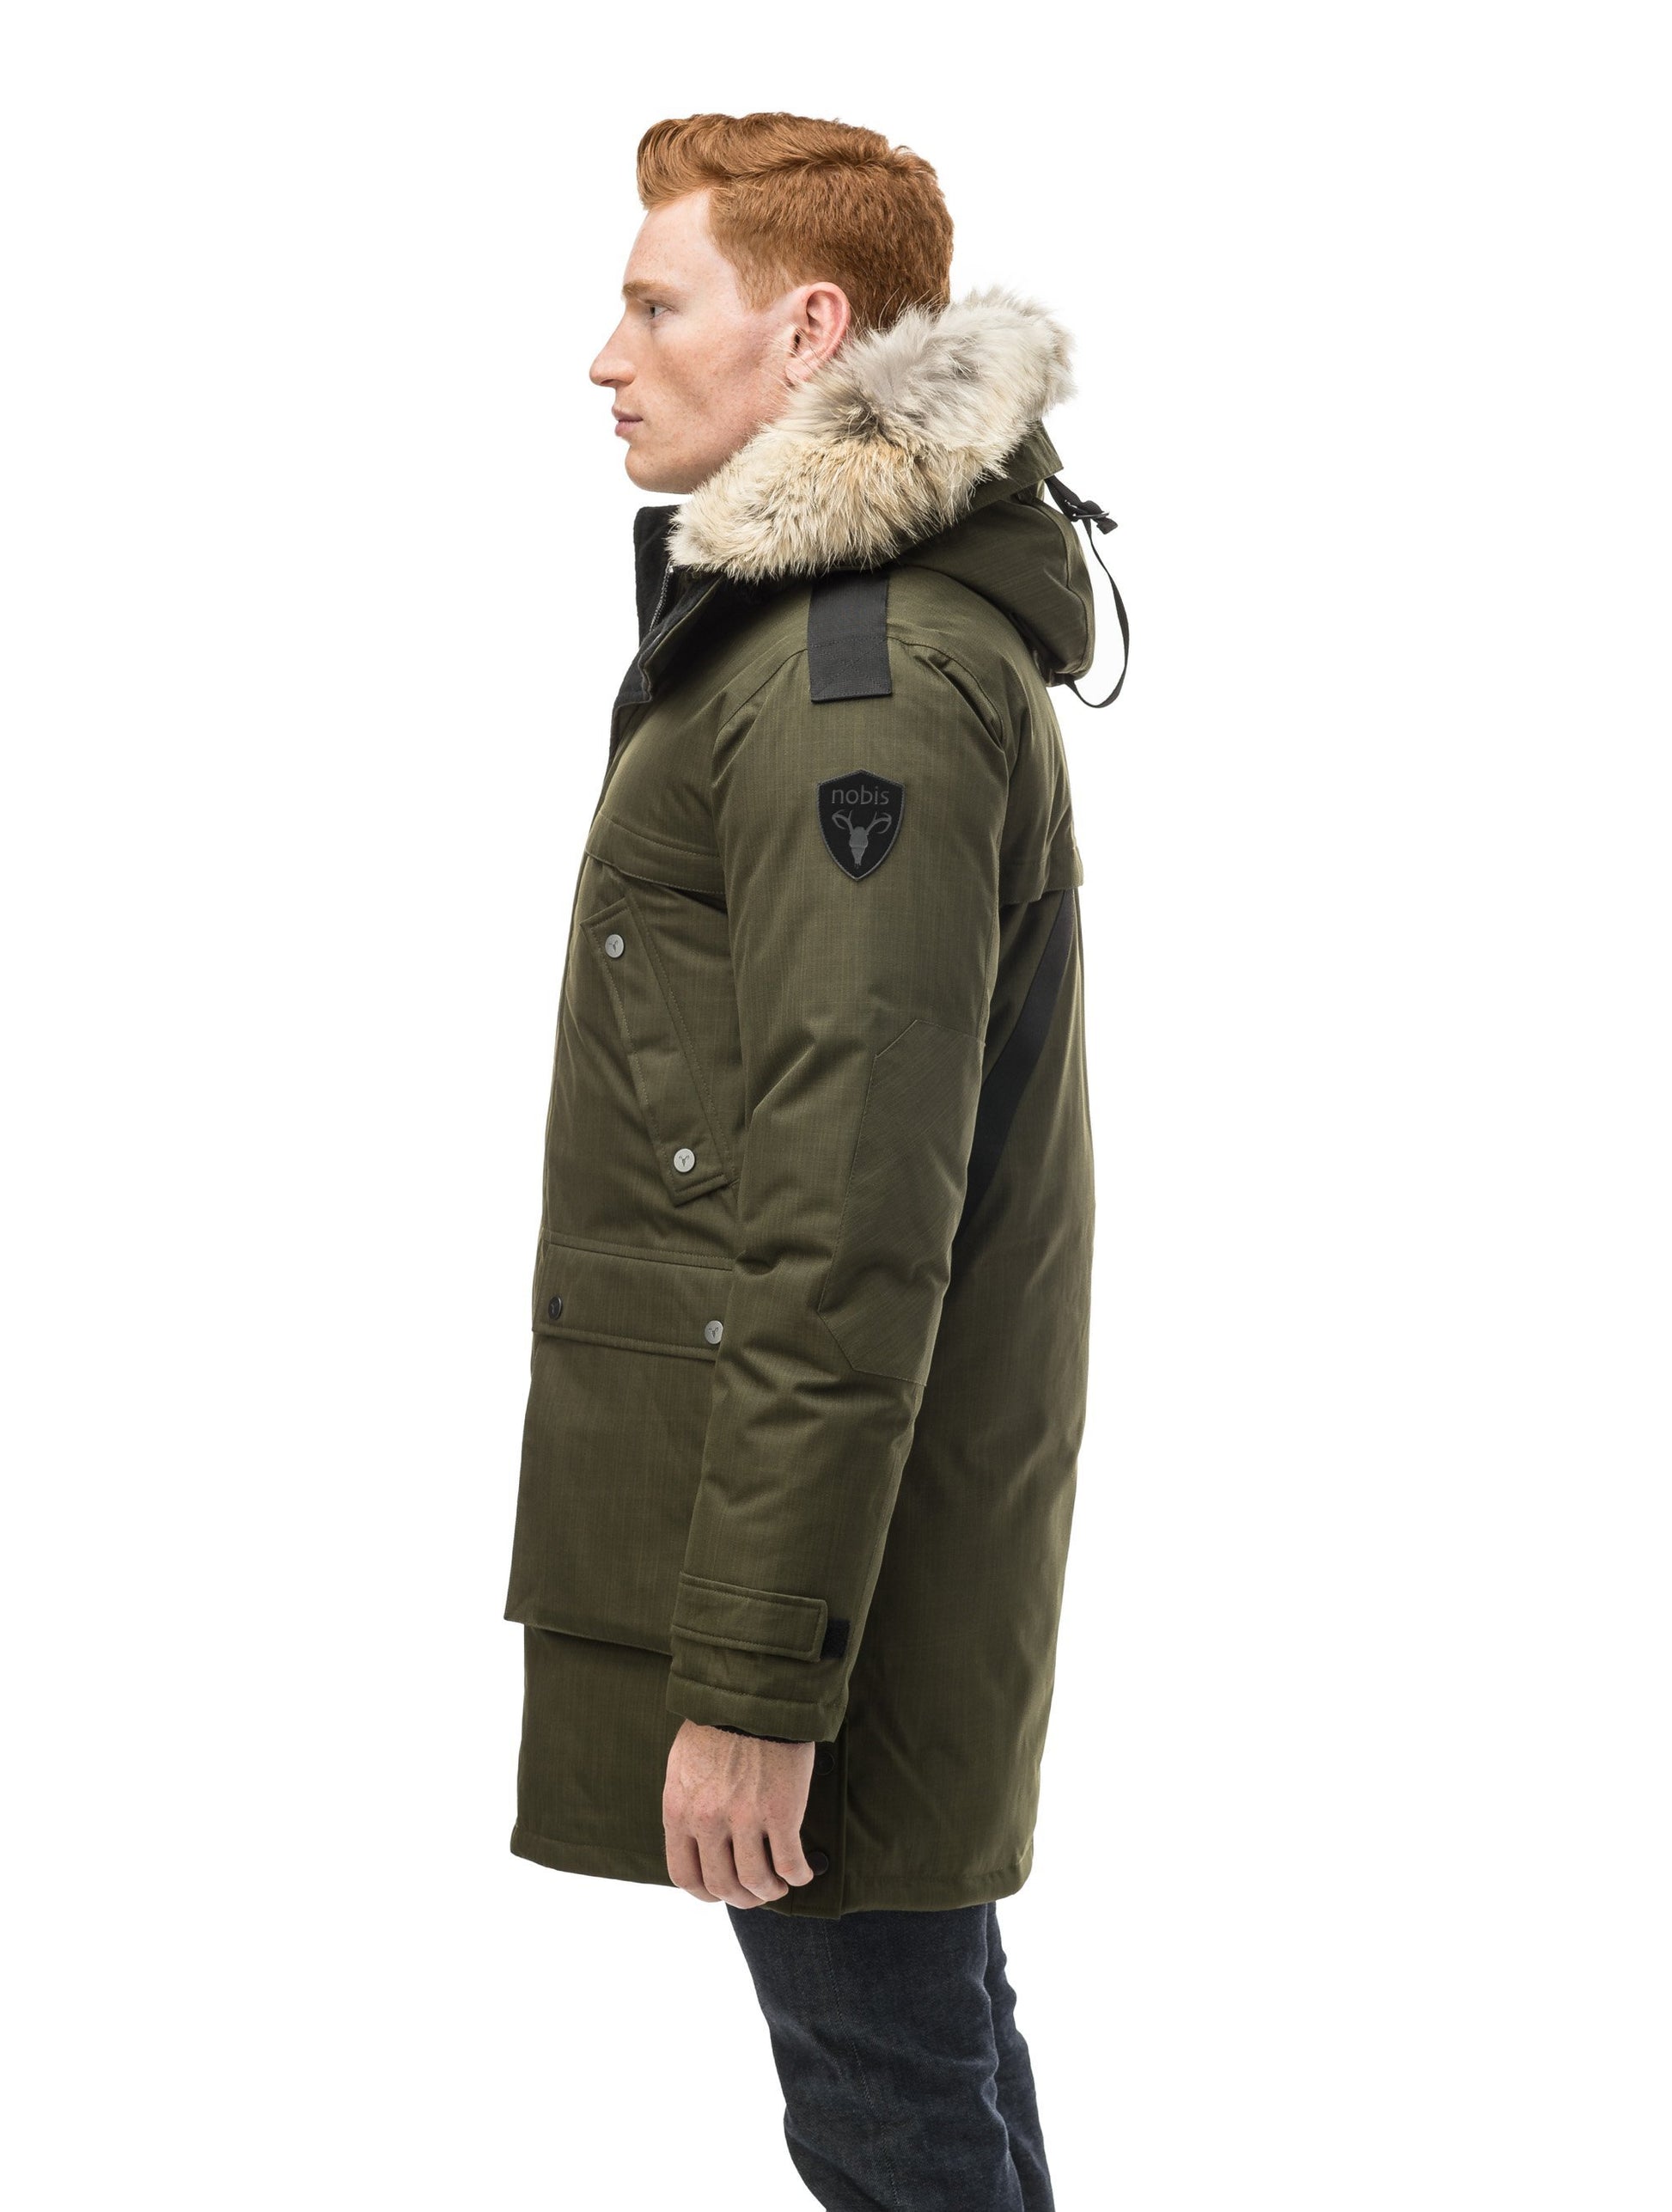 Men's Best Selling Parka the Yatesy is a down filled jacket with a zipper closure and magnetic placket in CH Fatigue